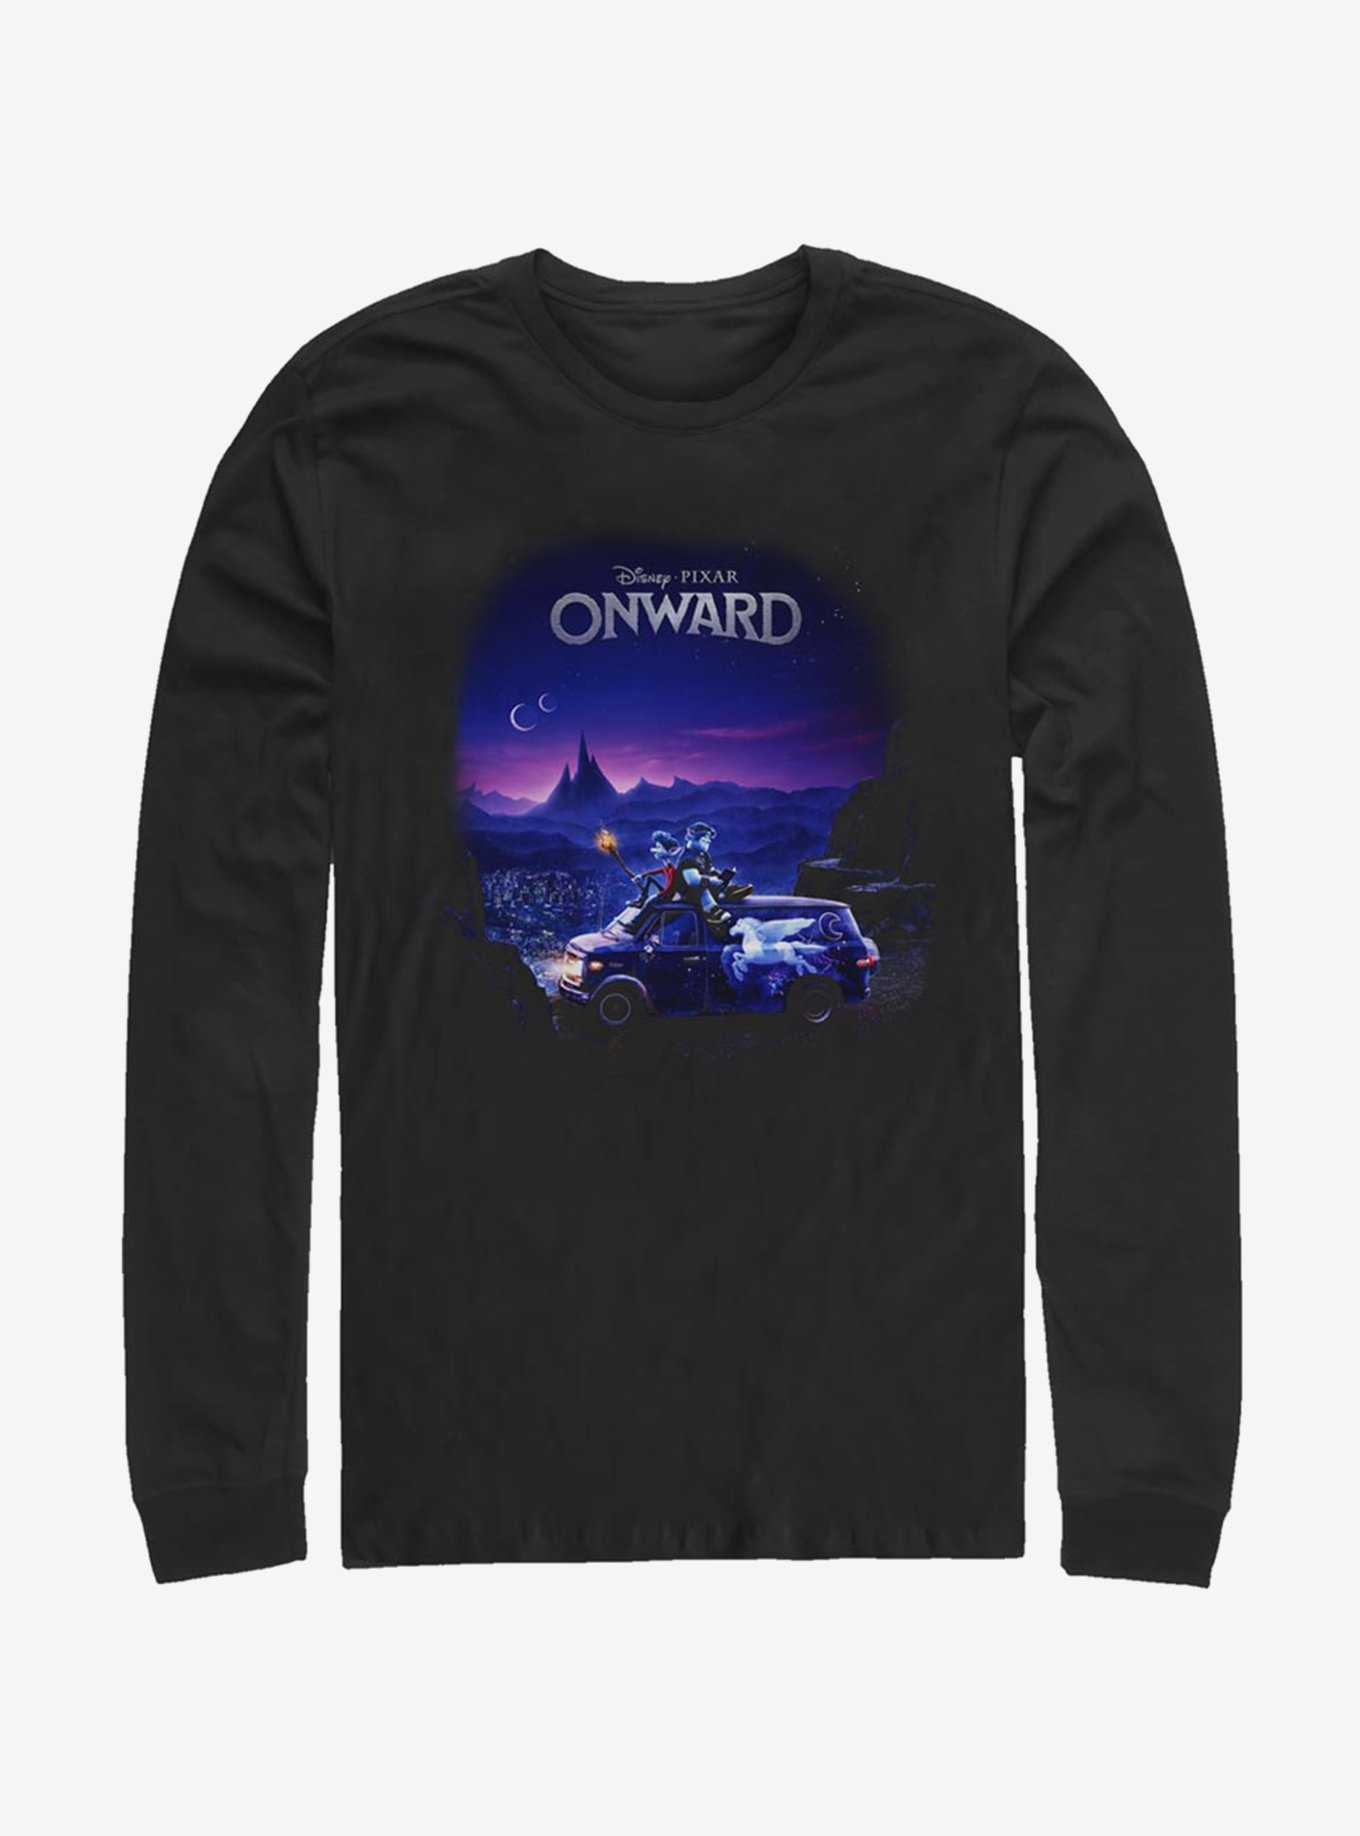 Onward Hot Movie & Topic | Merchandise T-Shirts OFFICIAL